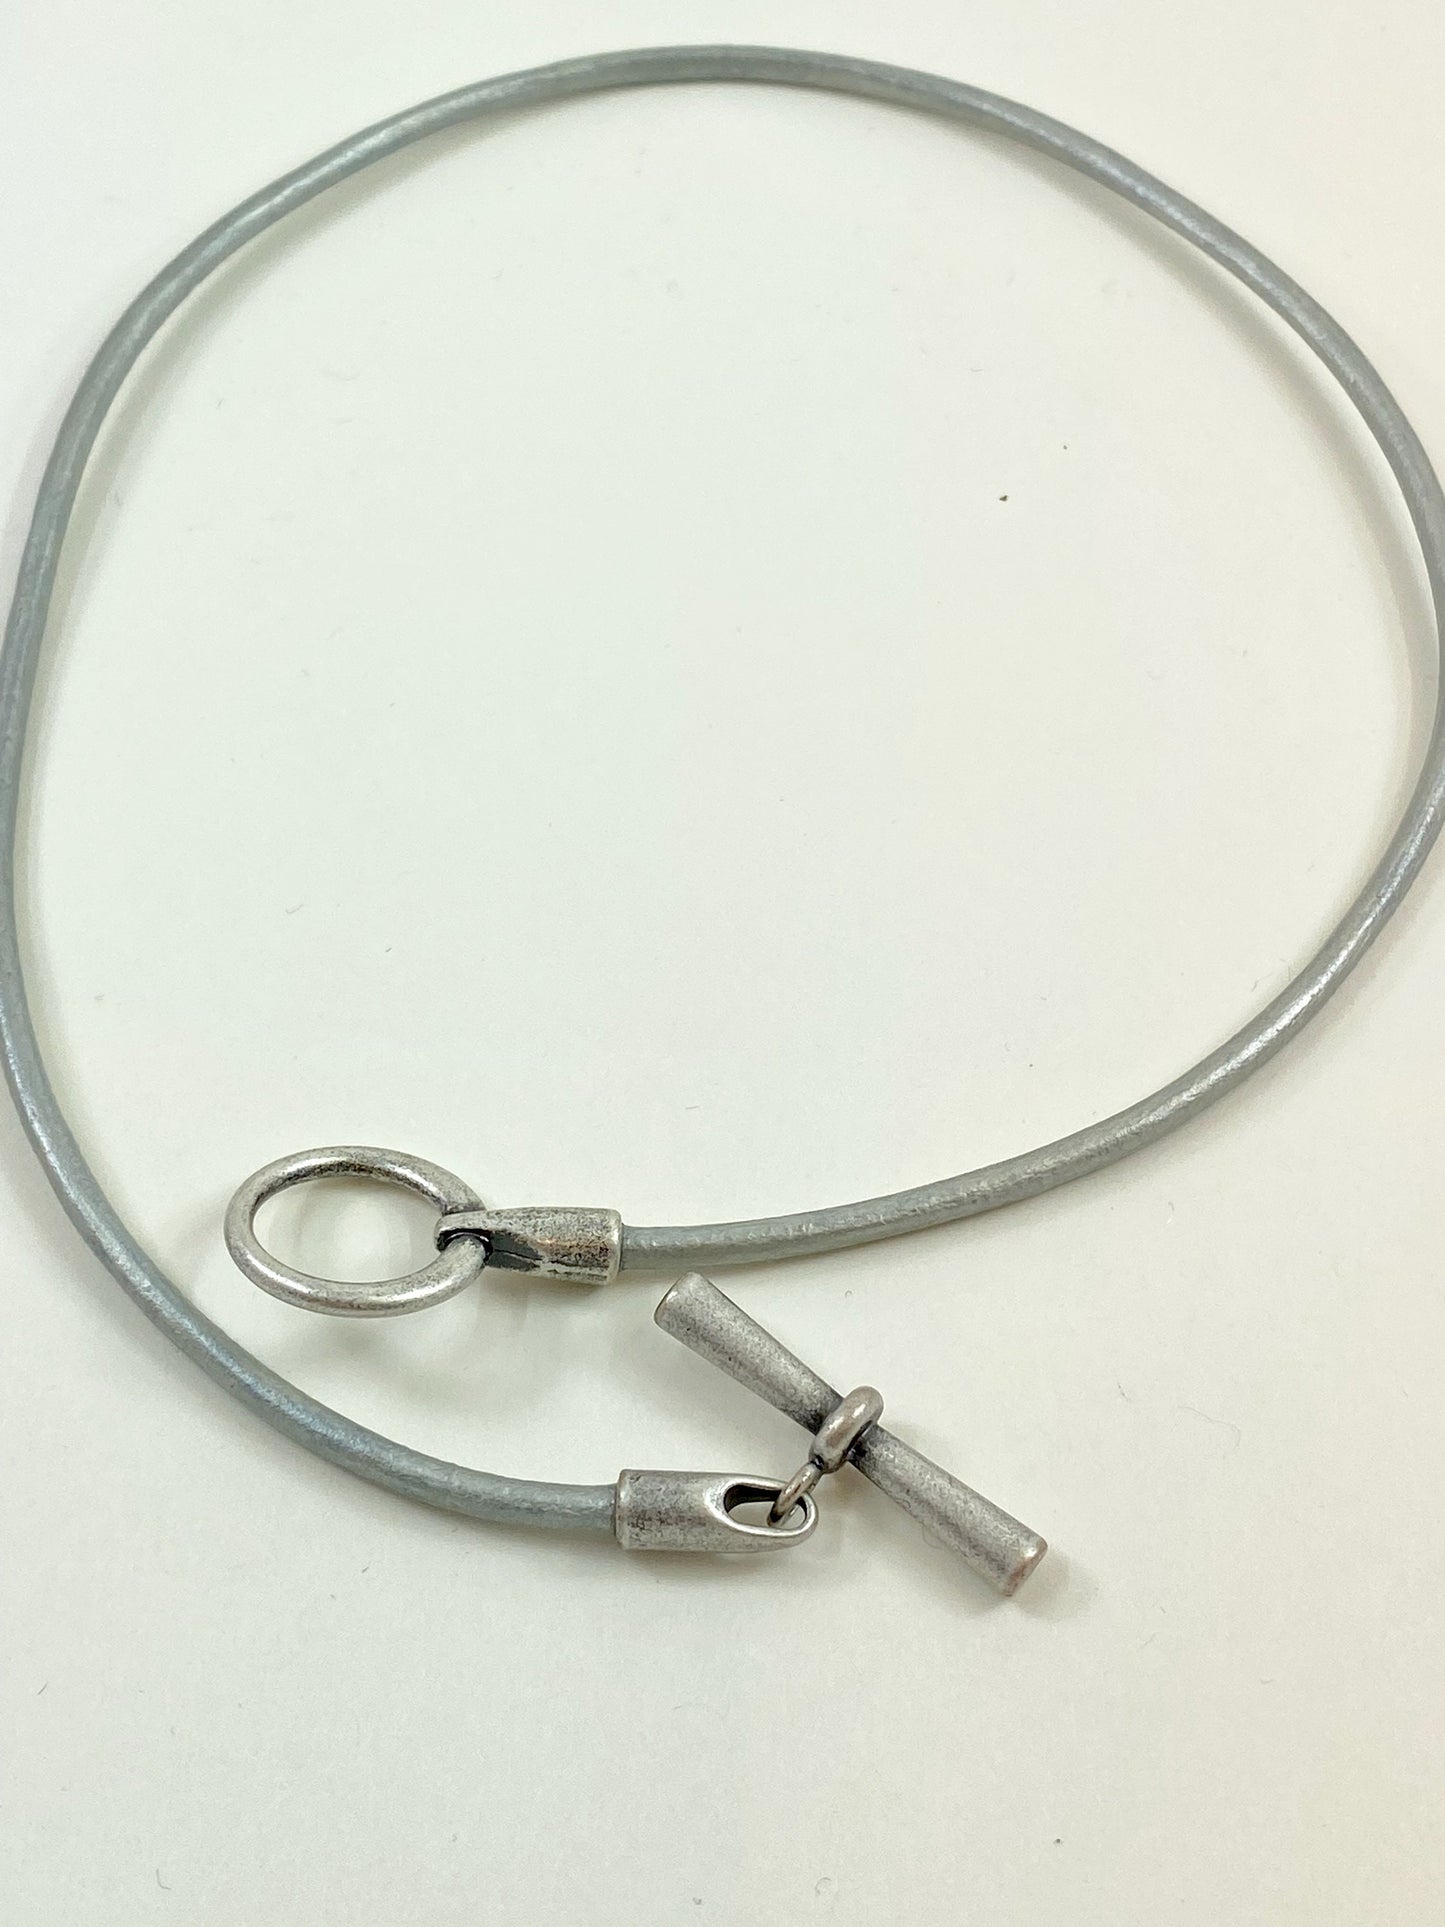 Leather Necklace. Hip silver Italian leather choker necklace fashioned with a center silver toggle clasp.